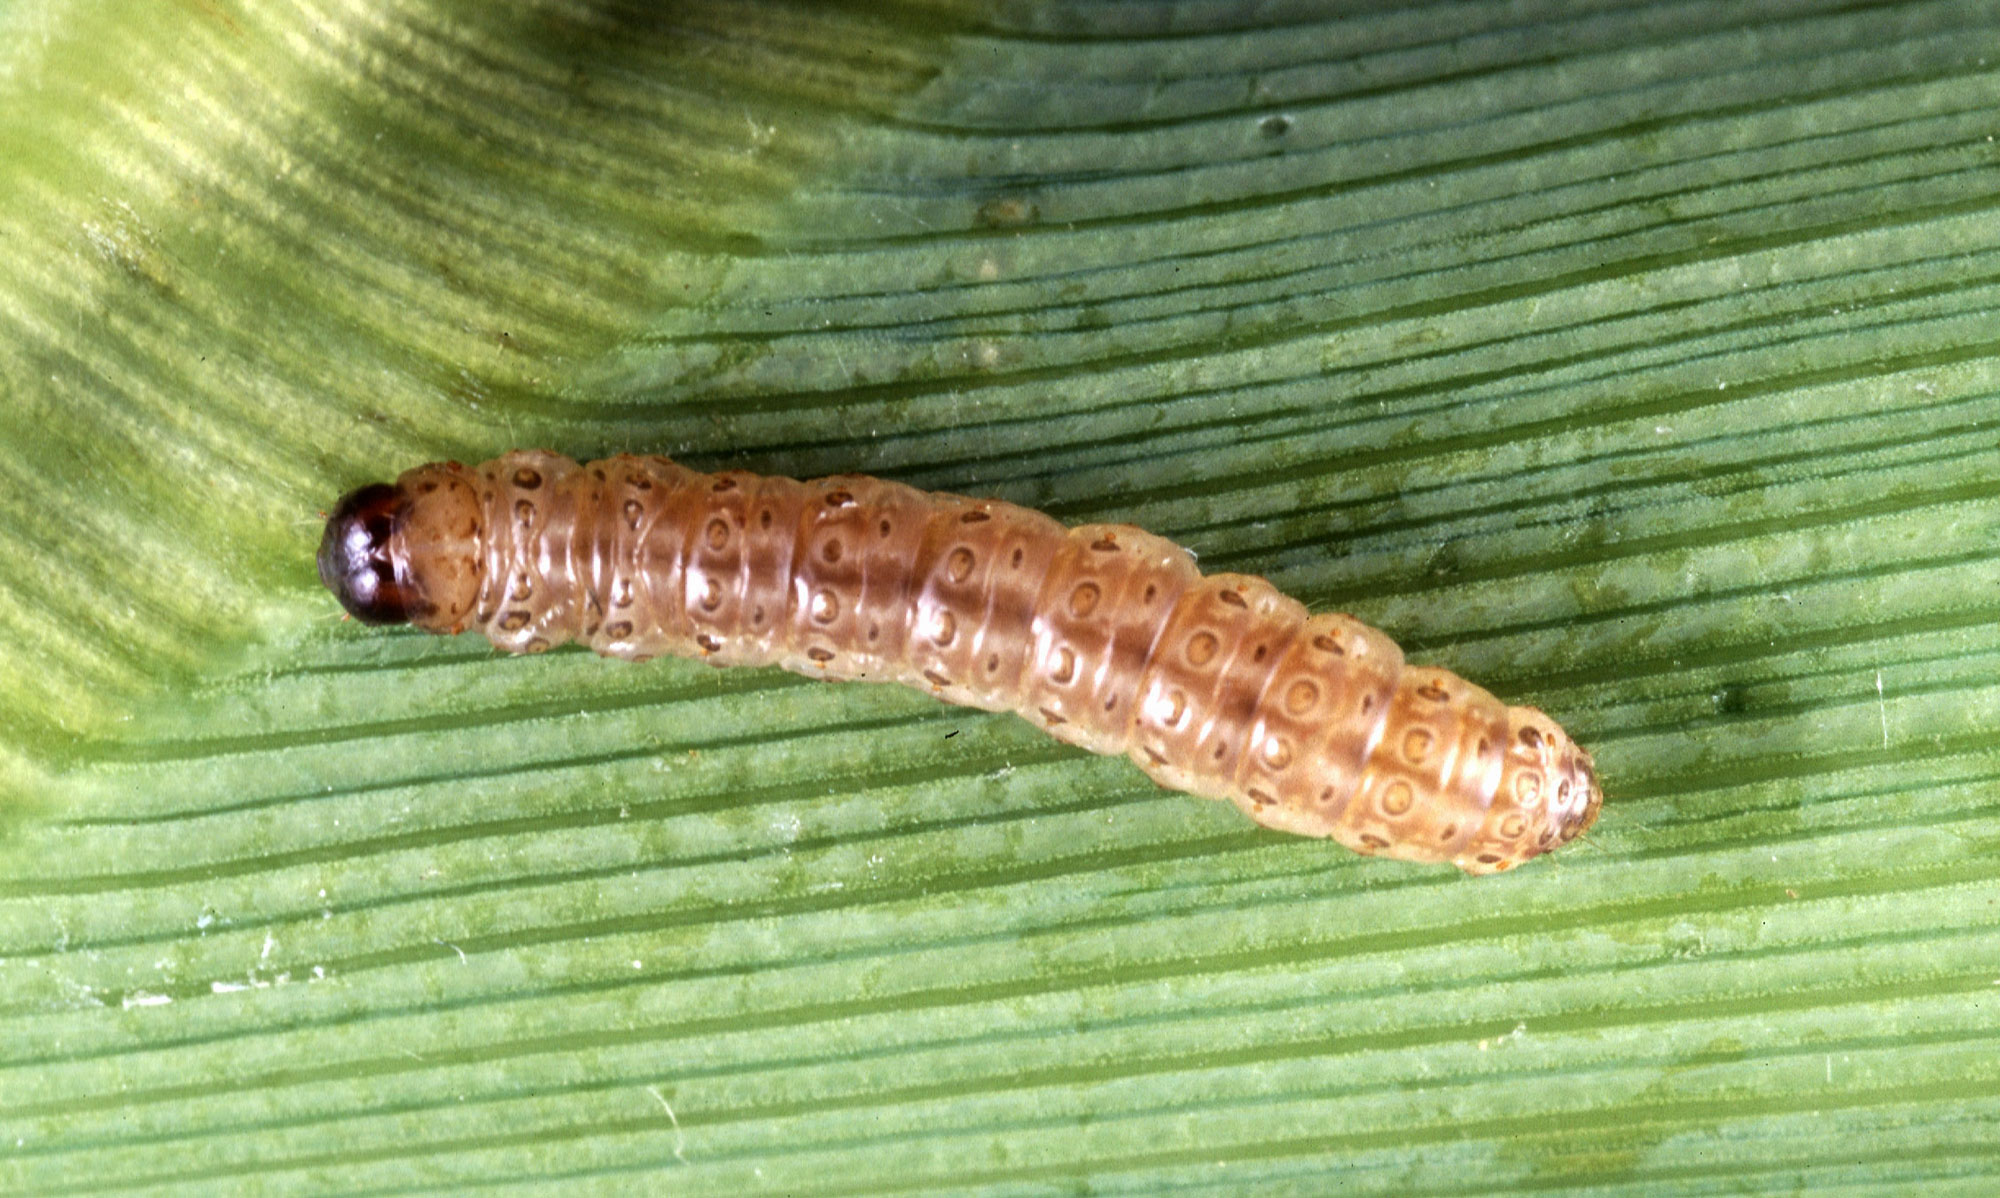 Photograph of a European corn borer on a corn leaf. The photo shows a brown caterpillar with a dark brown head on a green leaf with larger green parallel veins.